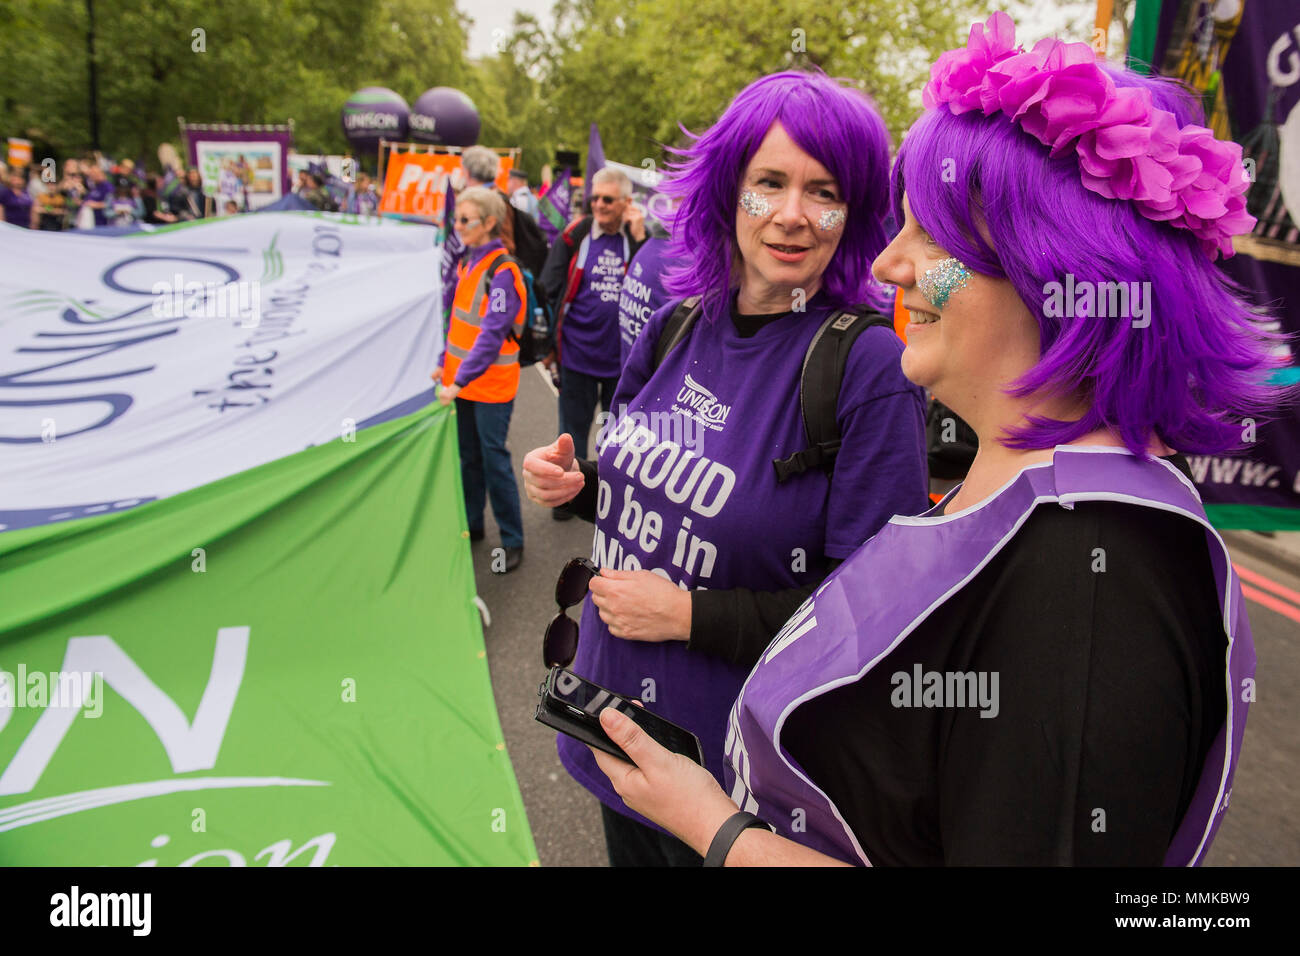 London, UK. 12th May 2018. TUC deal for working people -- march, demo & rally. Starting on the Embankment and ending with speeches in Hyde Park. They are marching for a growing economy; For a £10ph minimum wage; For better and free public services; And against racism, sexism and discrimination. Credit: Guy Bell/Alamy Live News Stock Photo